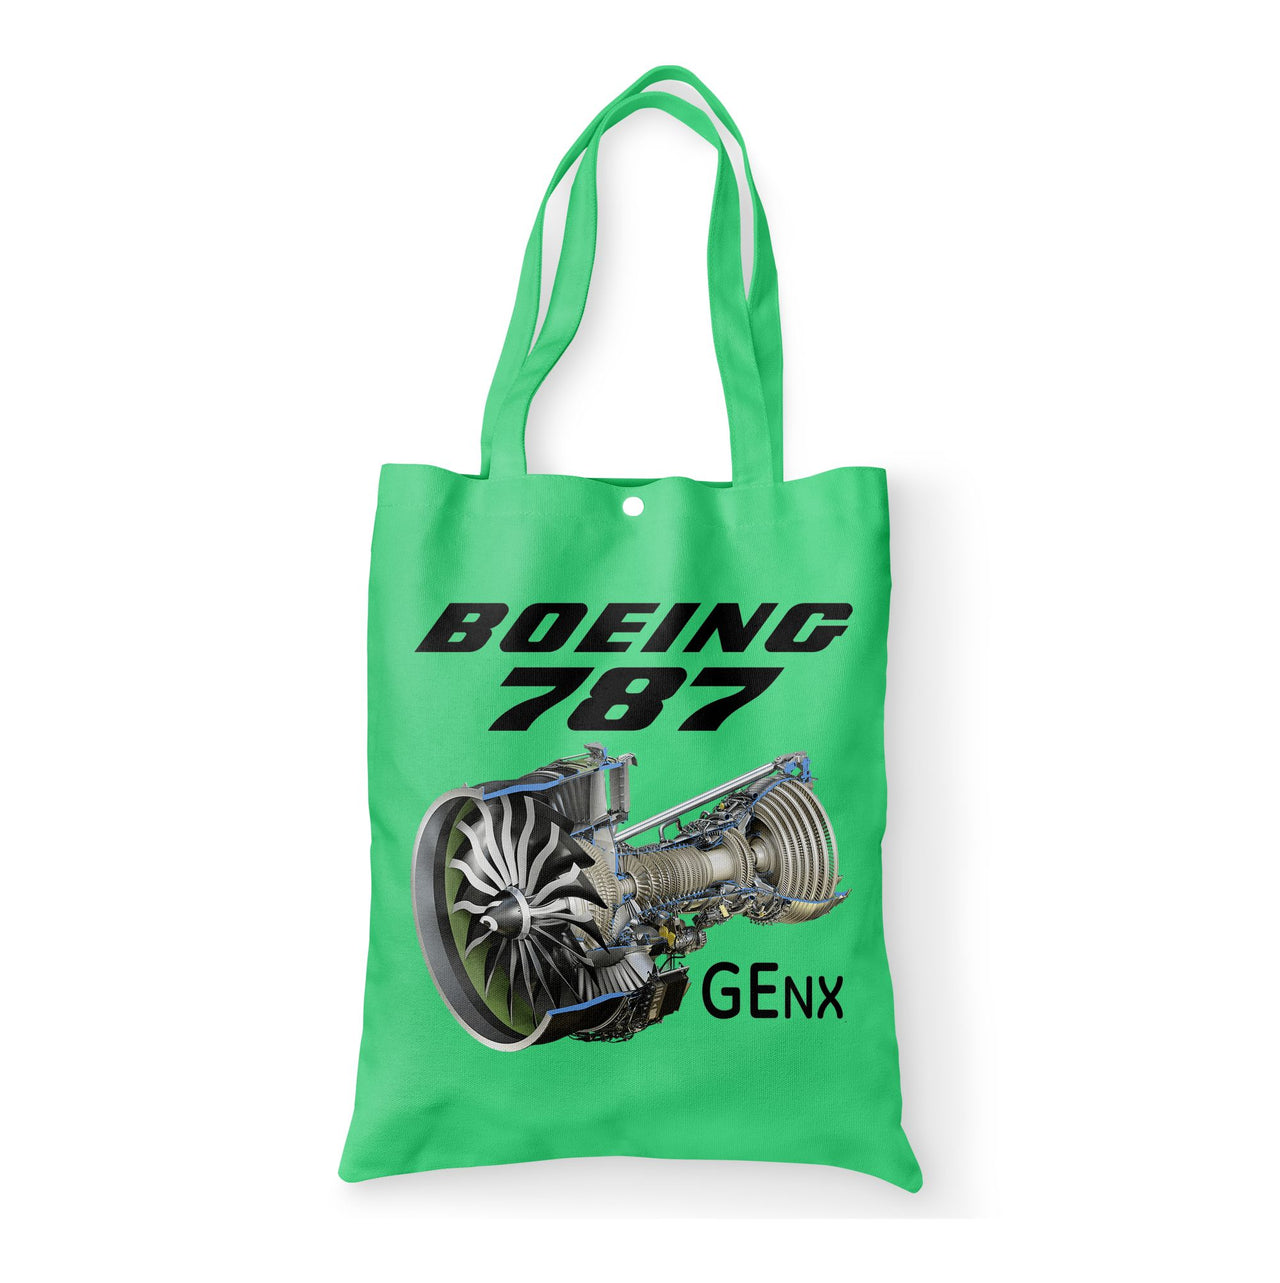 Boeing 787 & GENX Engine Designed Tote Bags